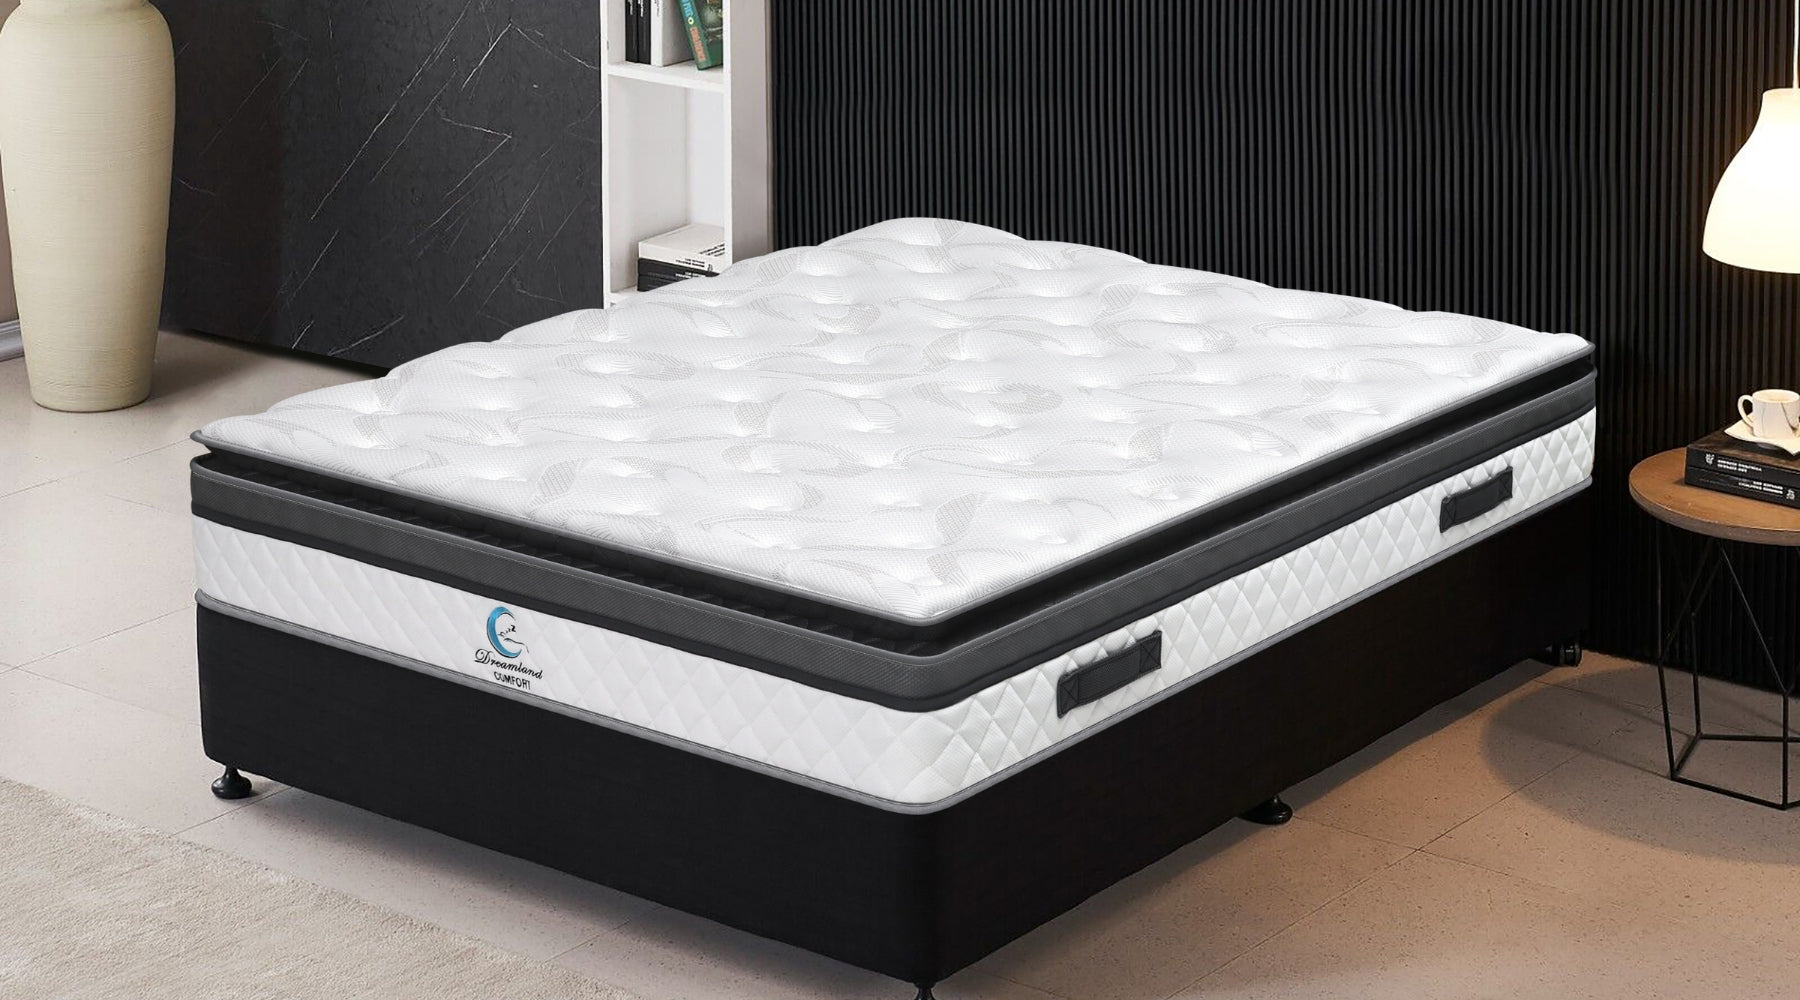 Choosing the Right Spring Mattress: From Continuous Spring to Multi-Zone Pocket Spring